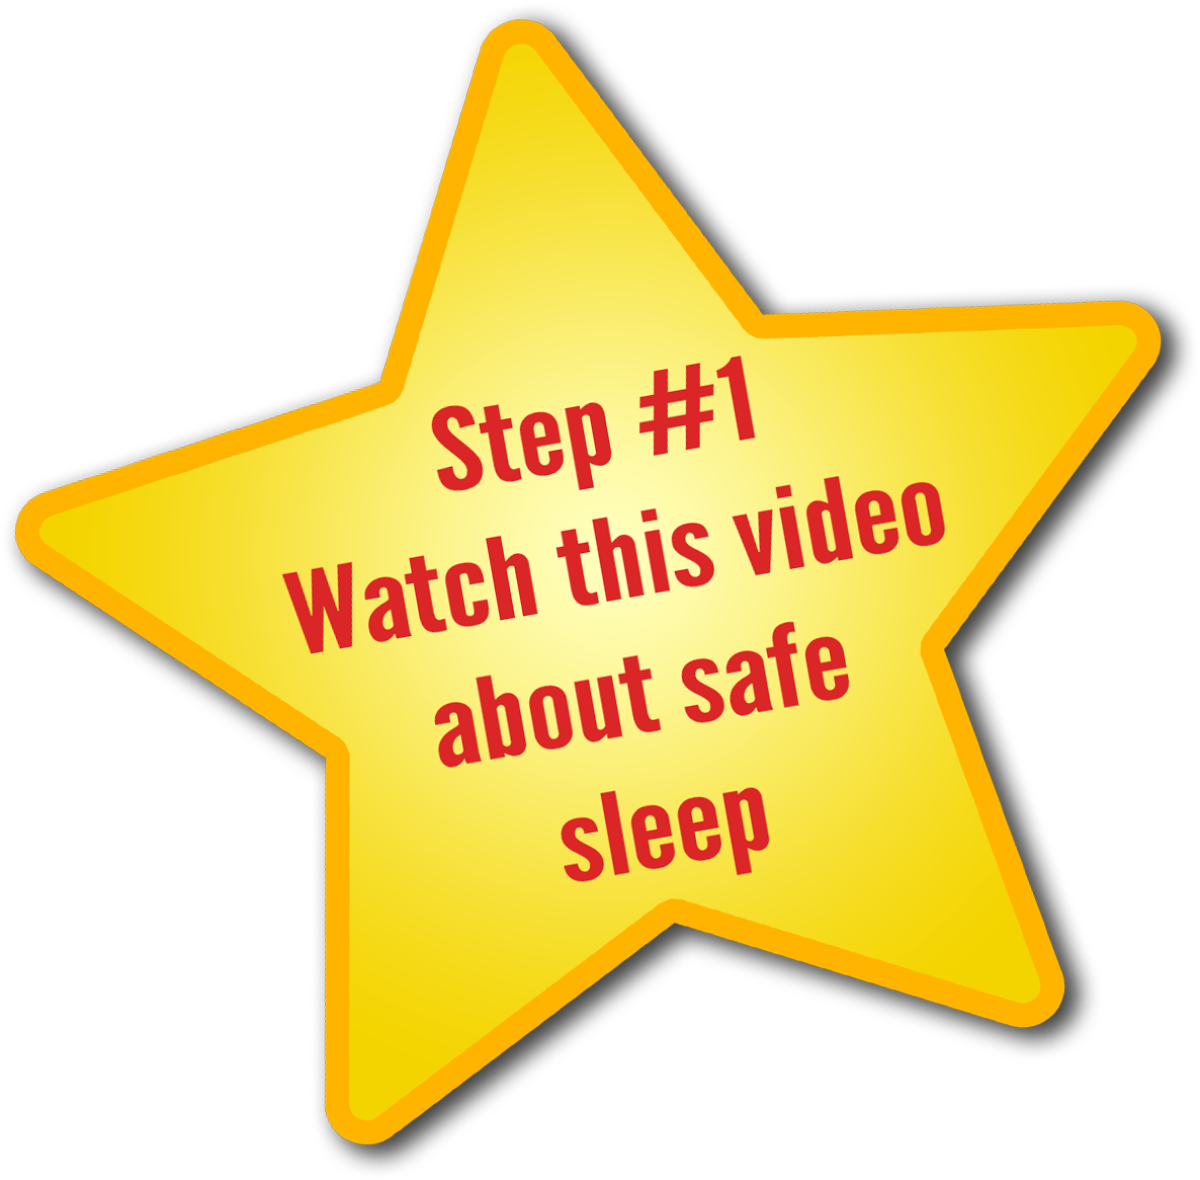 Step 1 - Watch this video about safe sleep